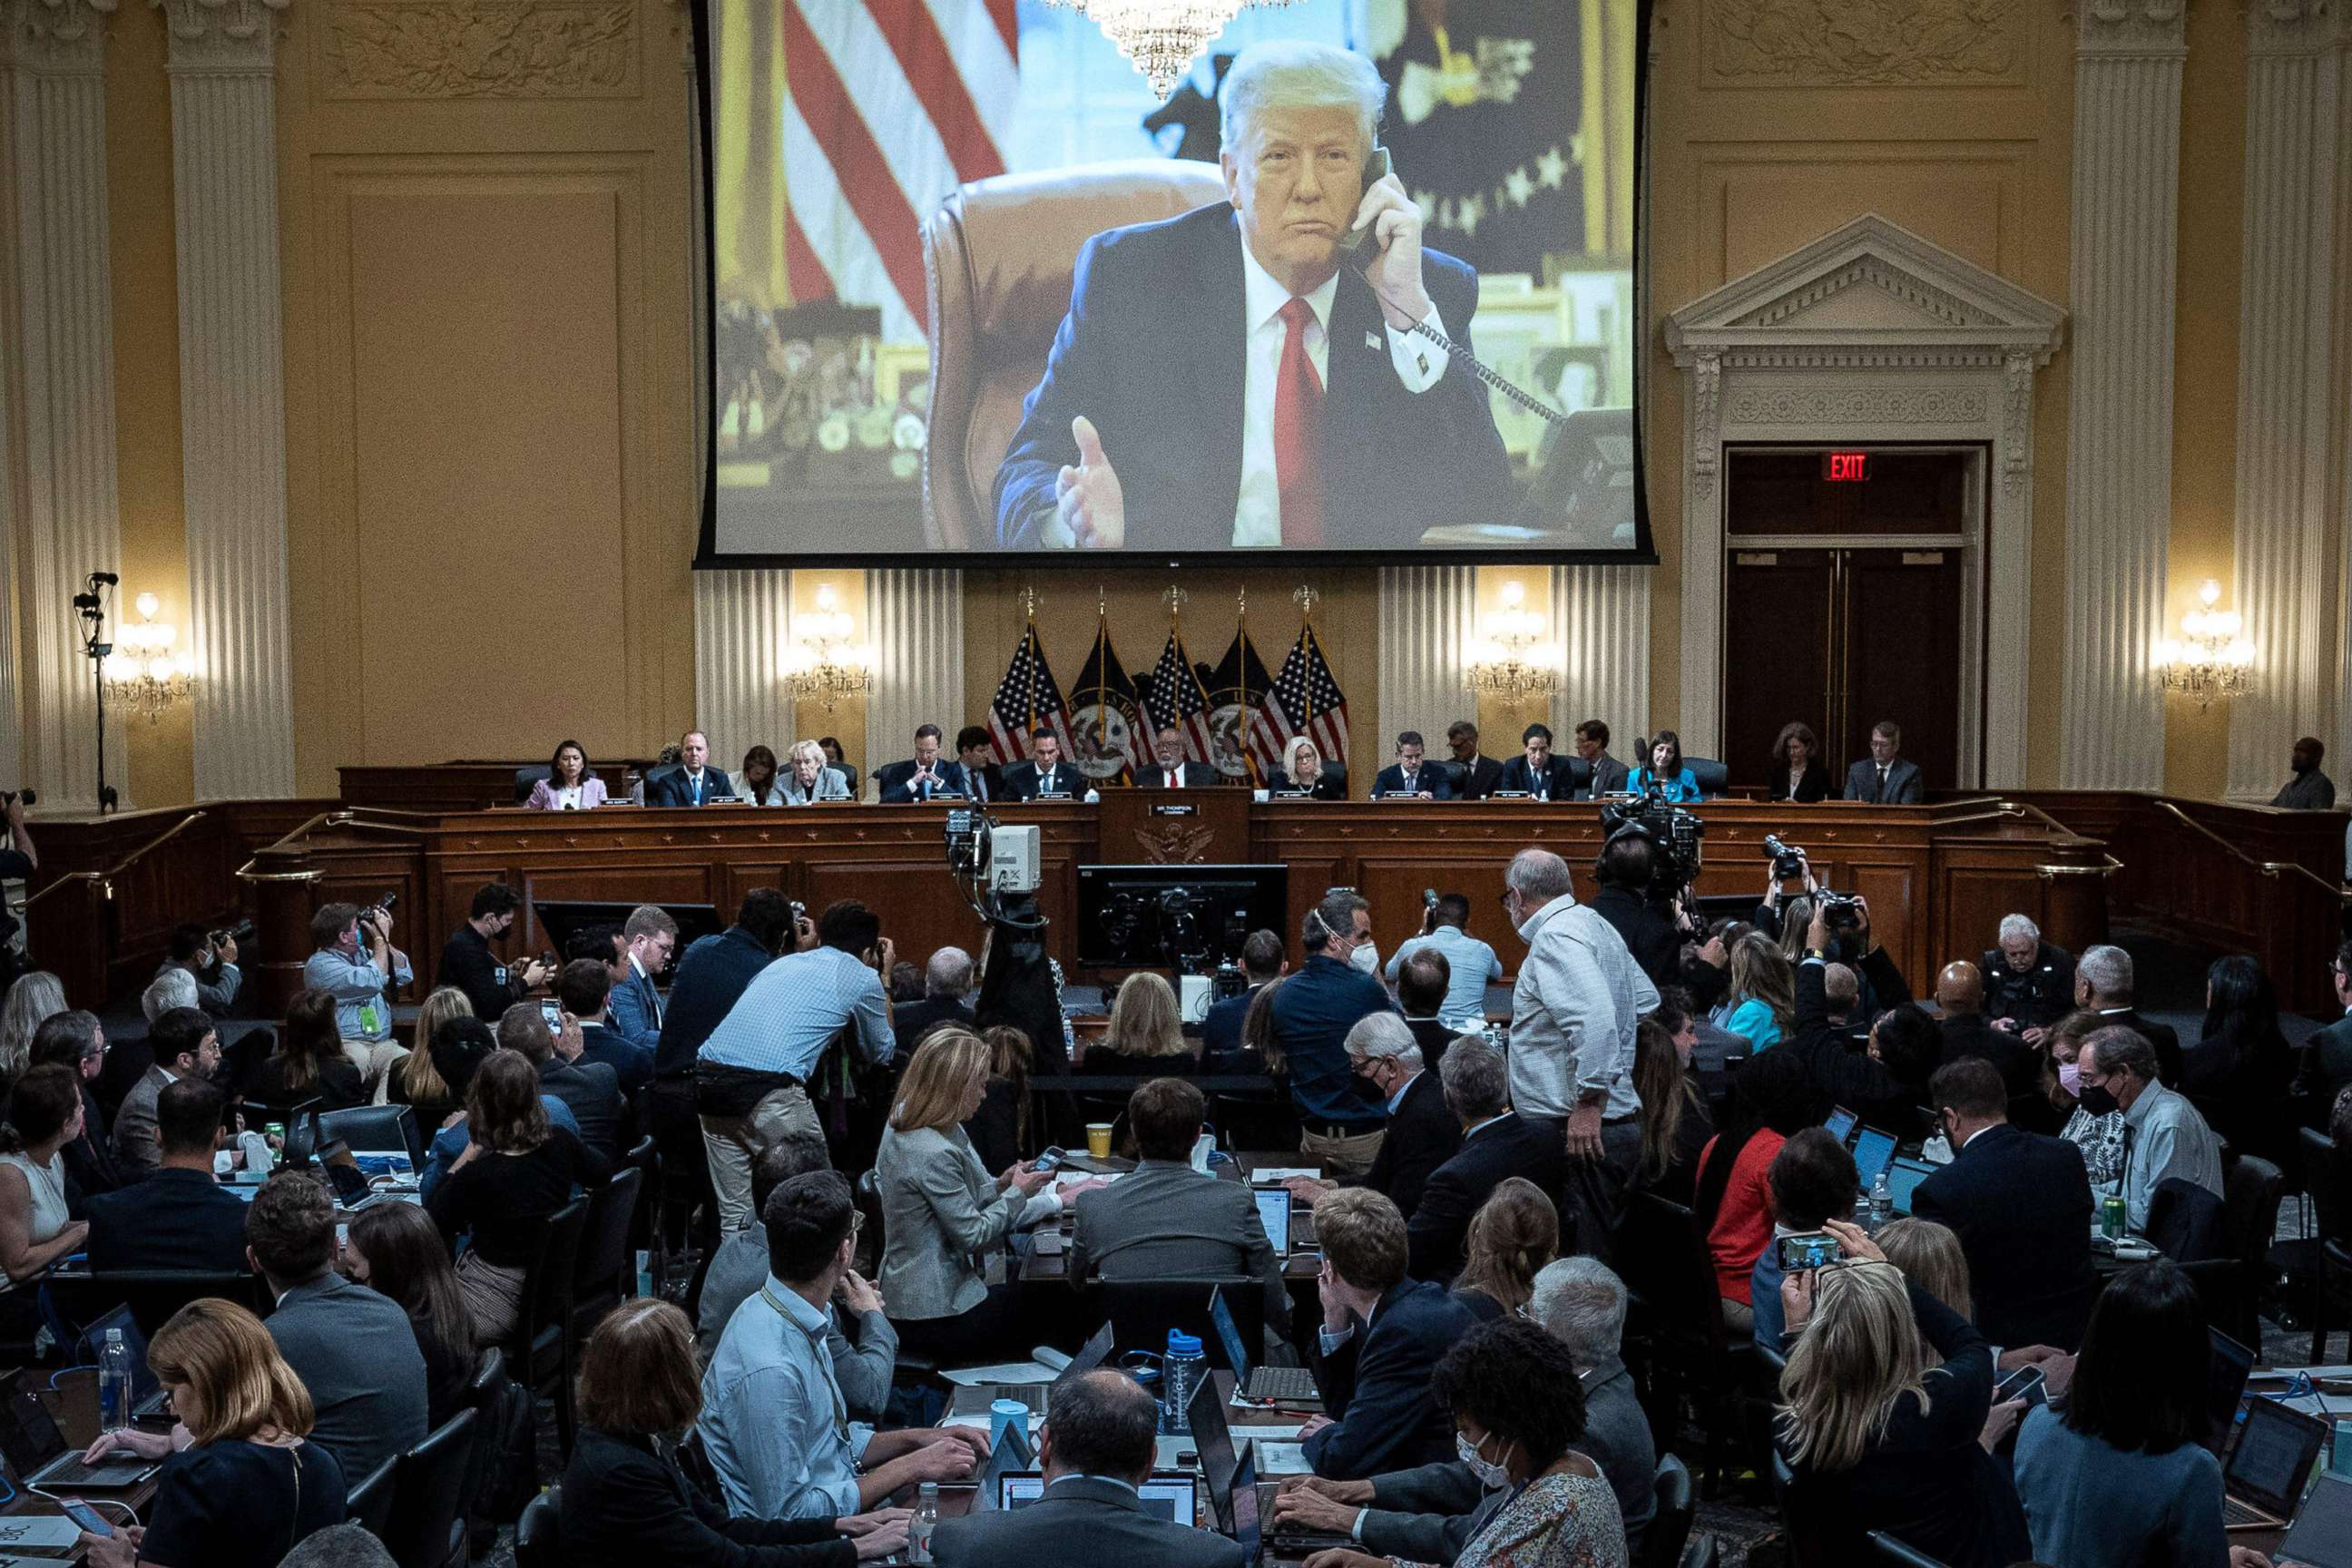 PHOTO: An image of former President Donald Trump is displayed during the third hearing of the US House Select Committee to Investigate the January 6 Attack on the US Capitol, June 16, 2022. 